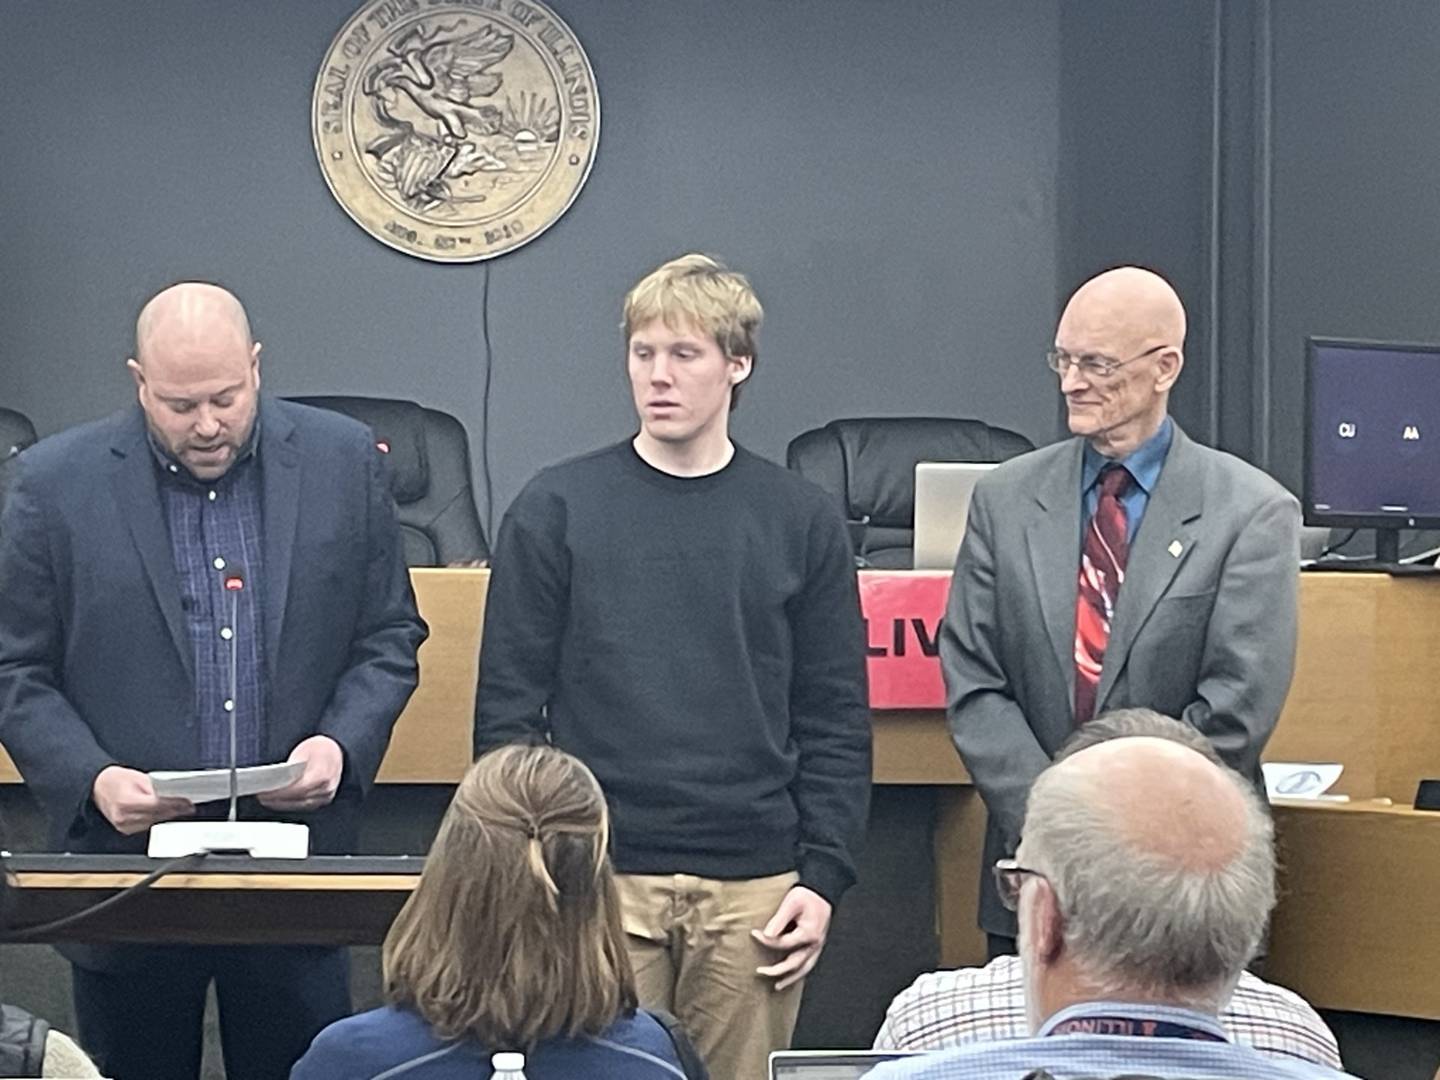 Griffin Cook (center), a senior at Earlville High School, and La Salle County Board Chairman Don Jensen (right) listen while Regional Superintendent of Schools Chris Dvorak (left) summarizes Cook's academic accomplishments Thursday, Feb. 8, 2024, at the county board meeting in Ottawa. Cook, son of Matt and Sarah Cook, is Earlville High's class president and high honor roll student who plays varsity soccer, basketball and baseball. He is one of two winners of the county's Student Excellence Award for February.